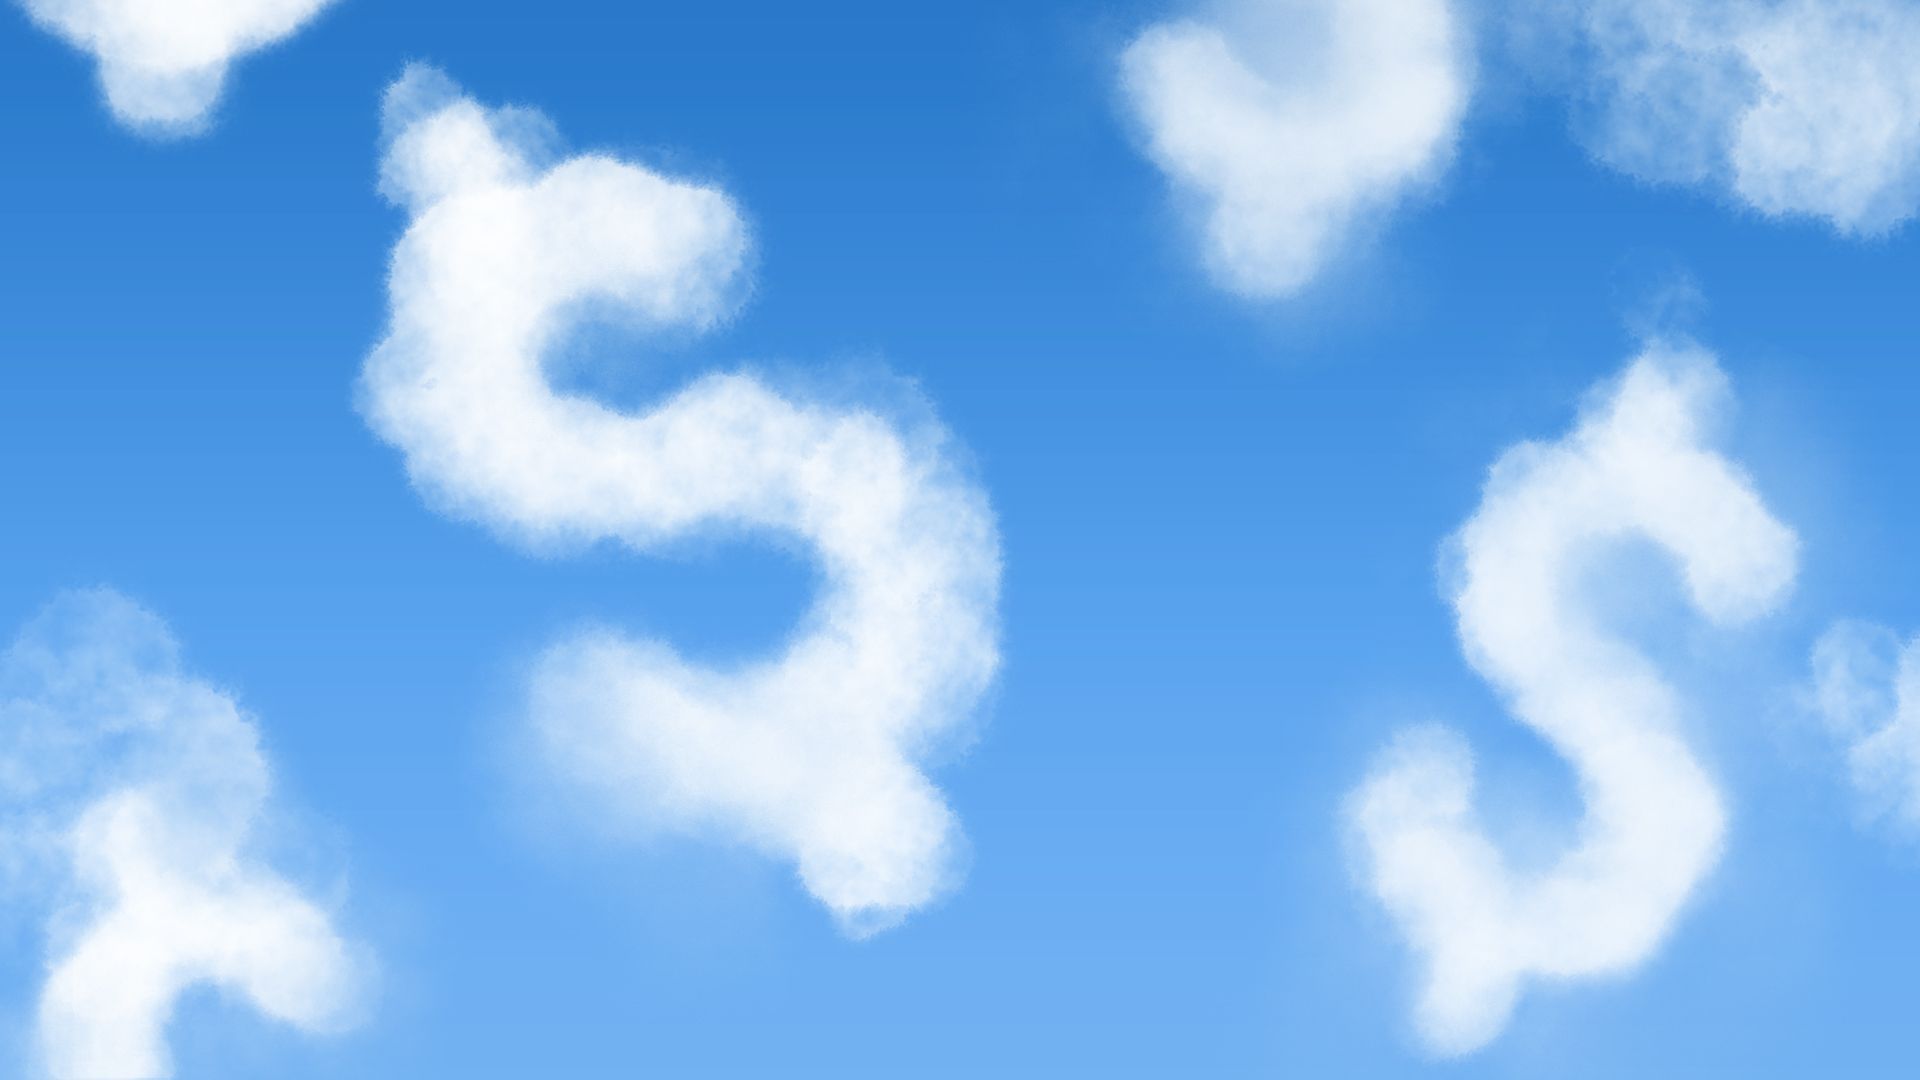 Illustration of clouds shaped like dollar bill signs